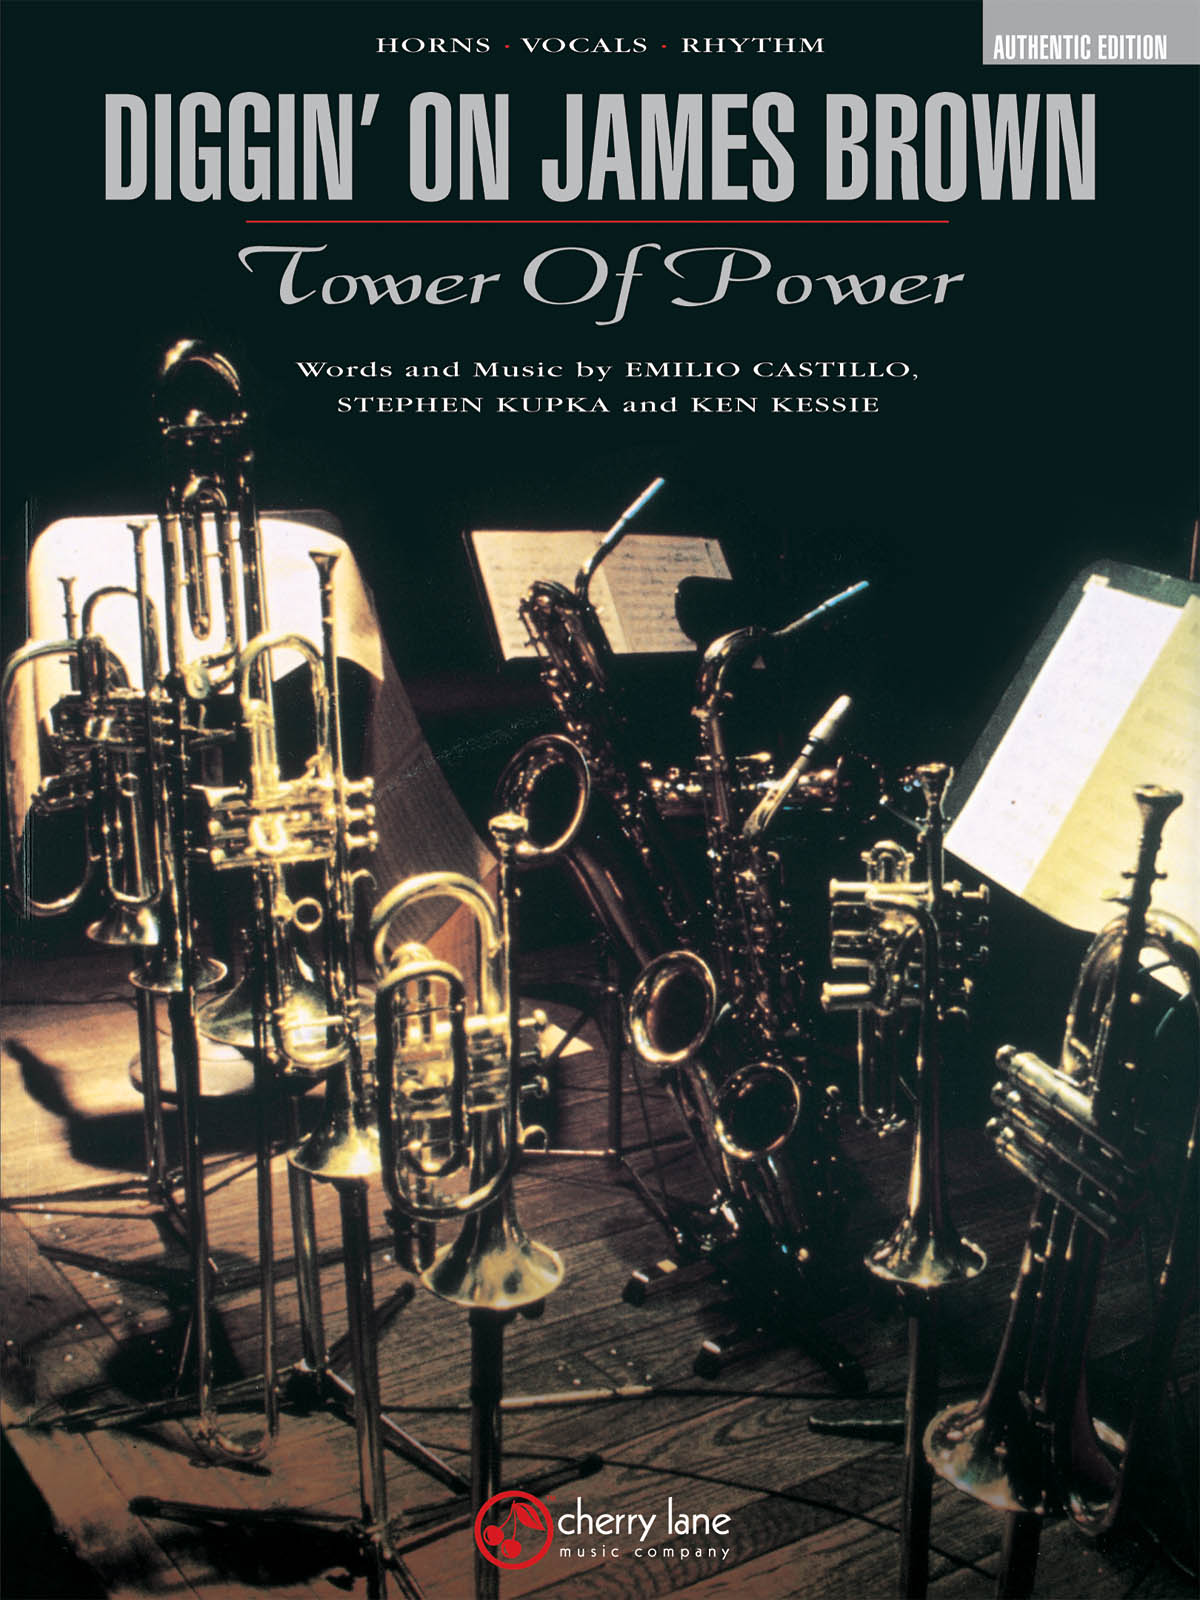 Diggin’ On James Brown Tower Of Power